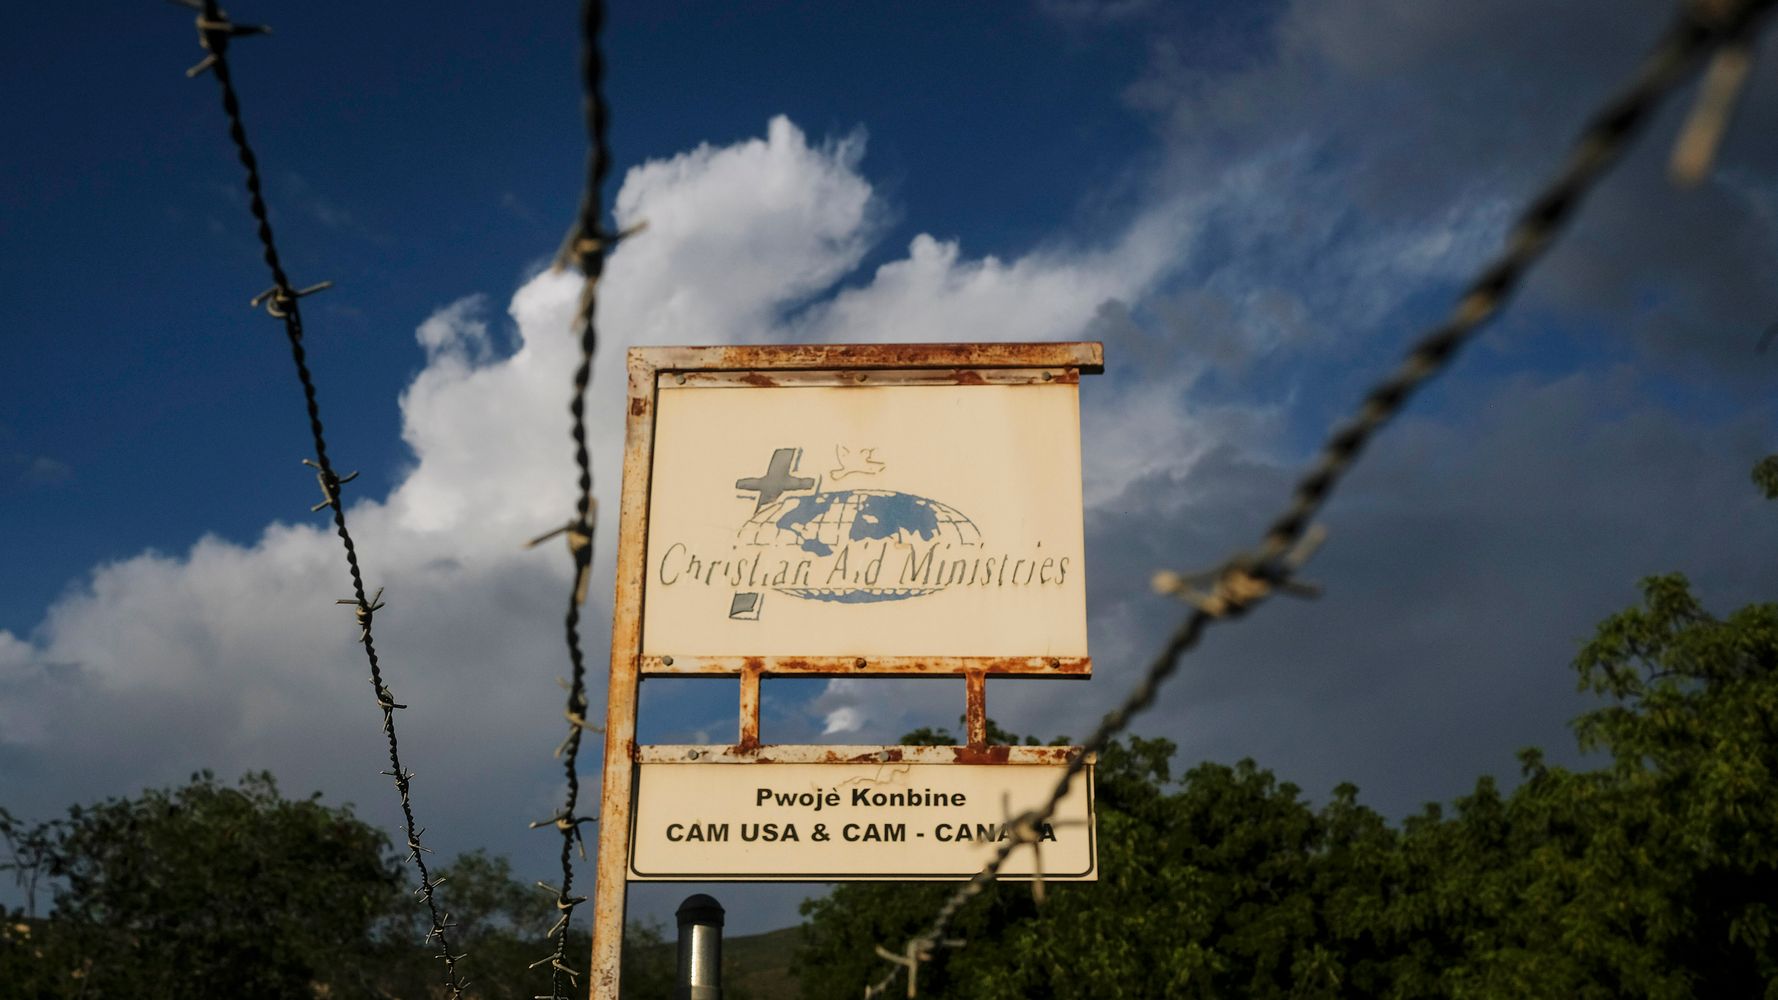 U.S. Religious Group Says Haitian Gang Releases 3 More Hostages